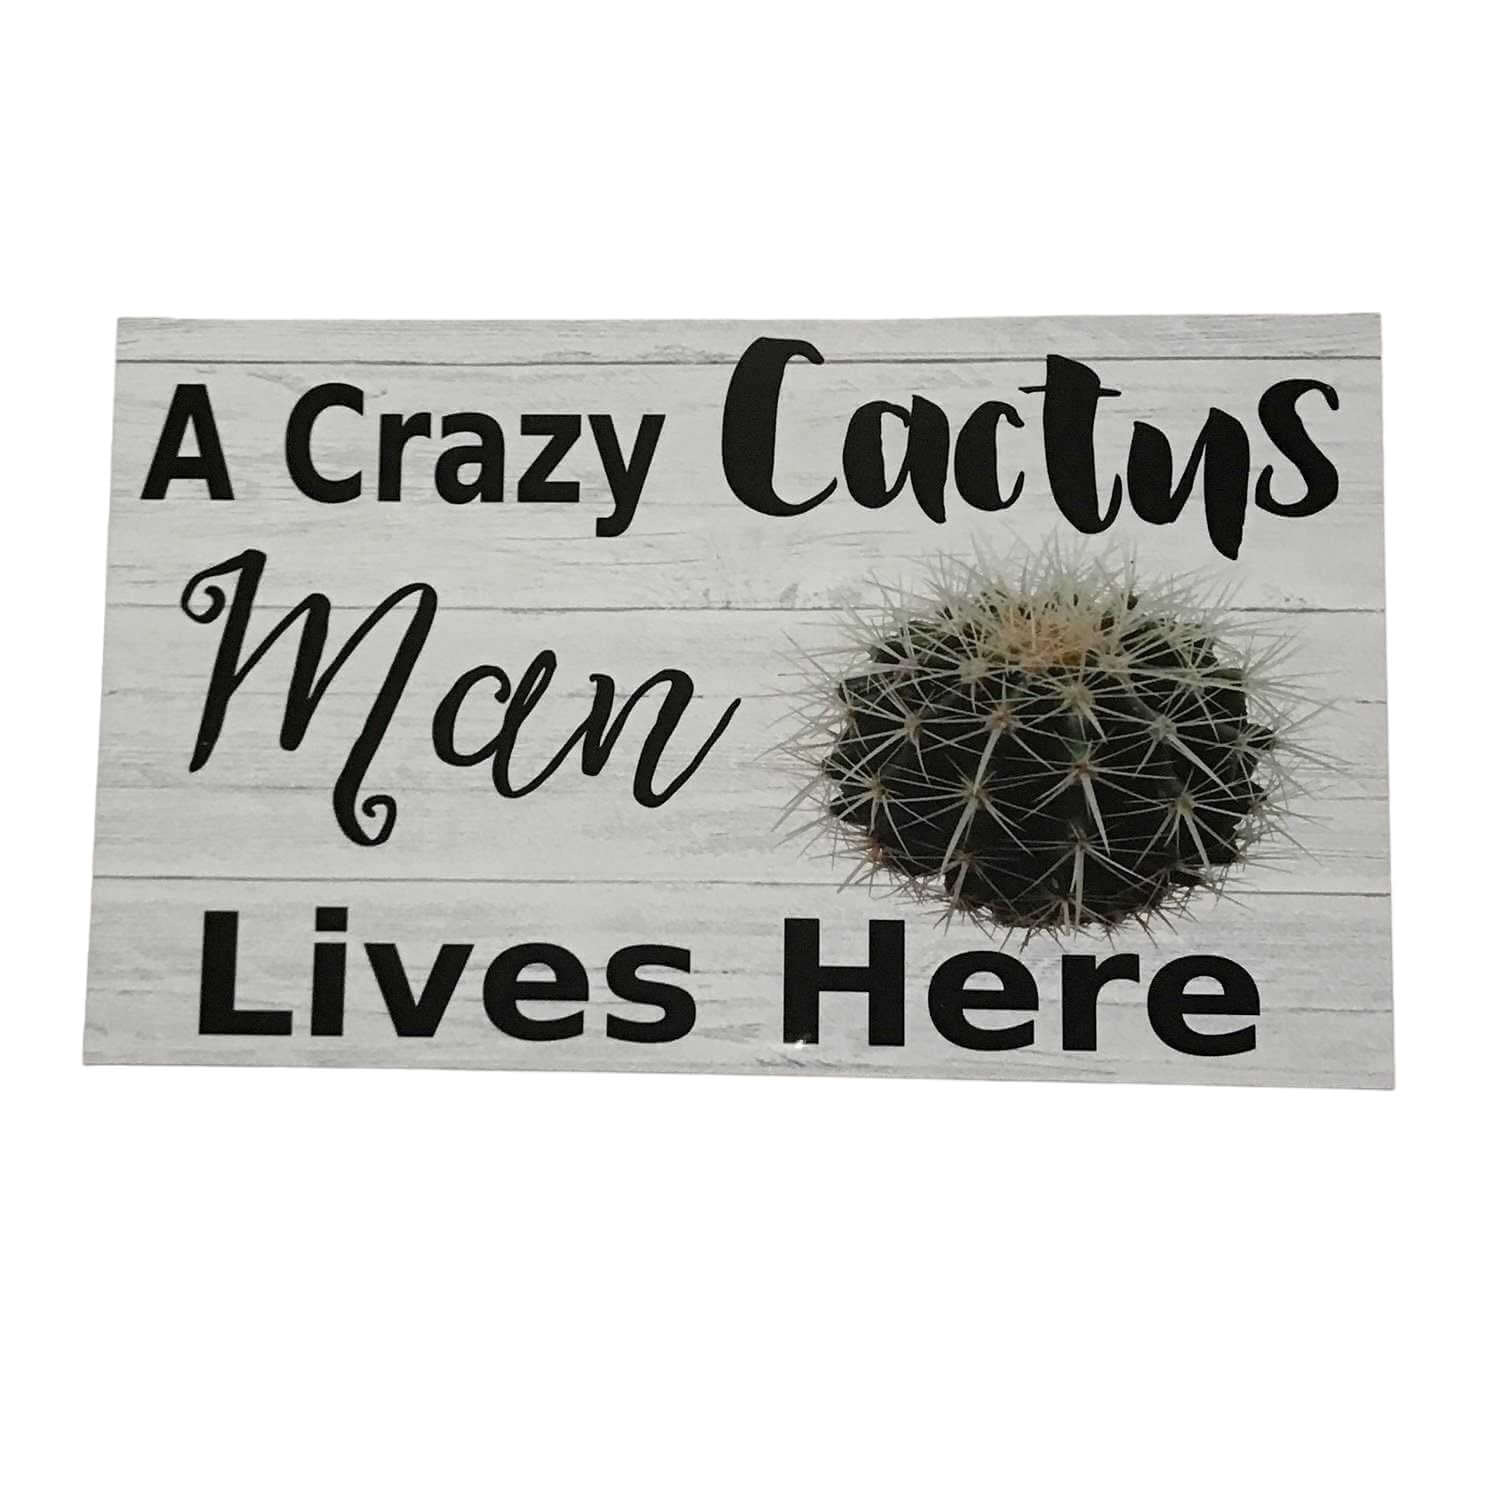 Crazy Cactus Man Lives Here Sign - The Renmy Store Homewares & Gifts 